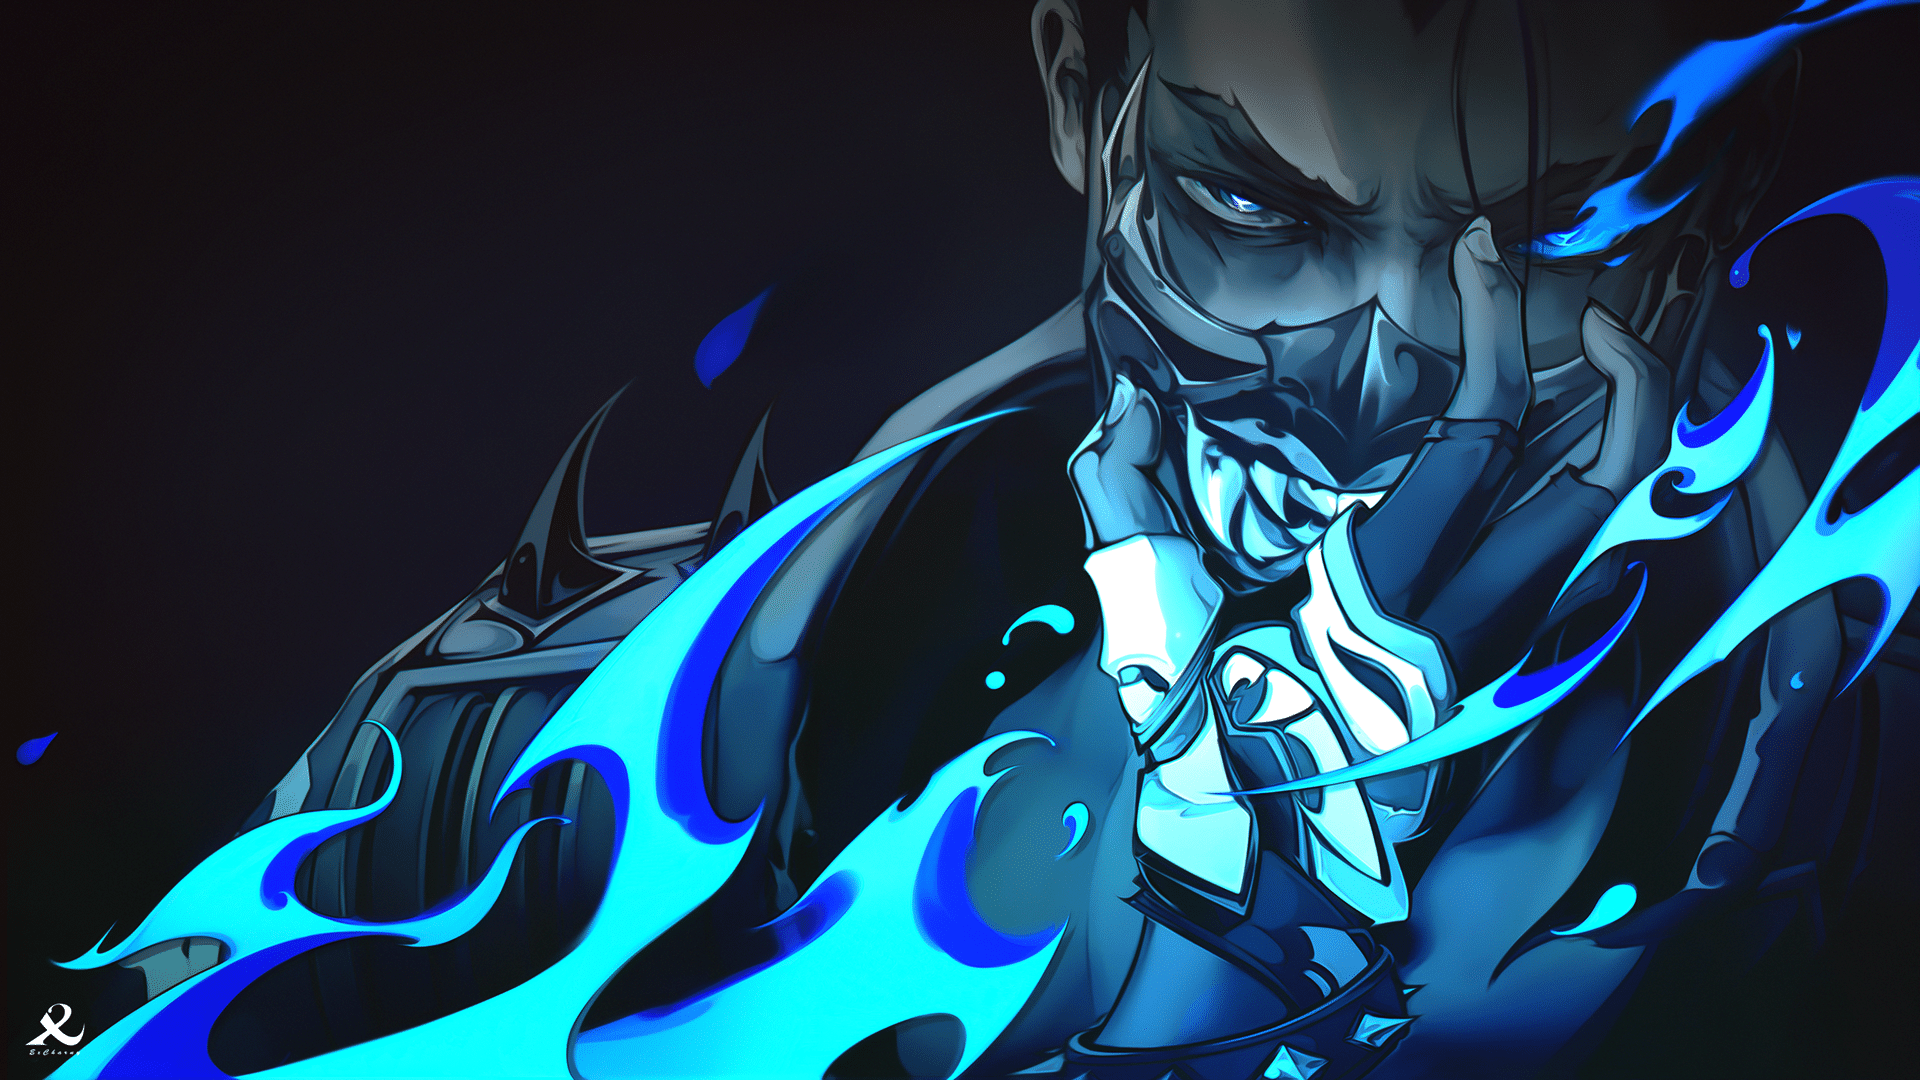 Image by Excharny – A Valorant wallpaper of Yoru using his Gatecrasher ultimate in a blue hue.